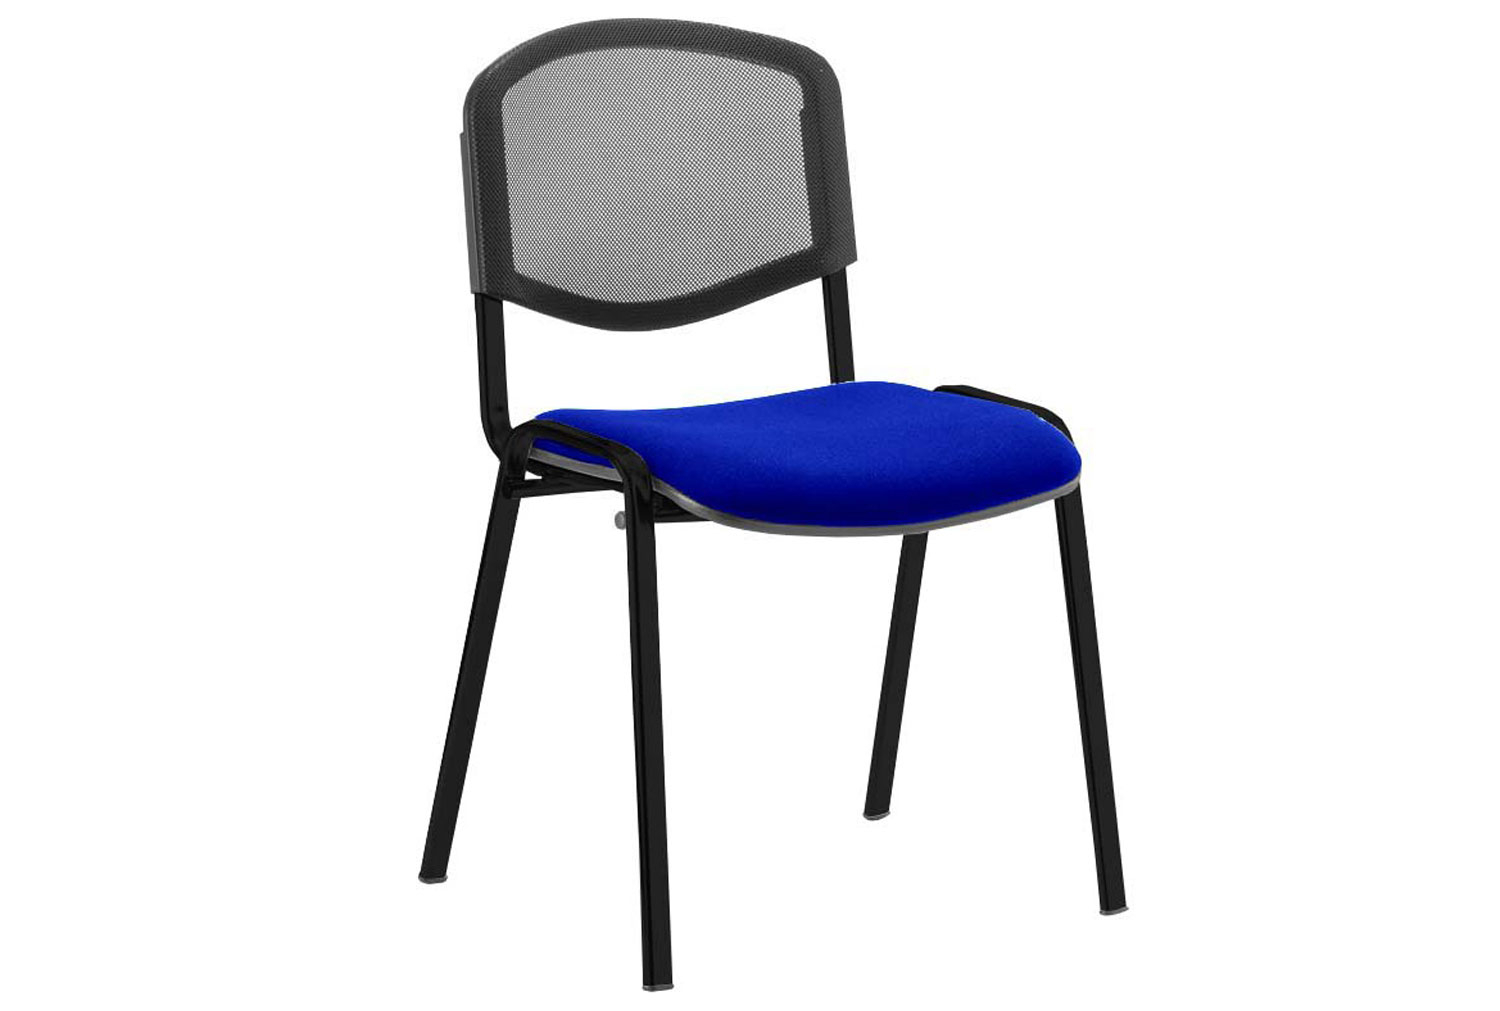 Qty 4 - ISO Black Frame Mesh Back Conference Office Chair (Stevia Blue)